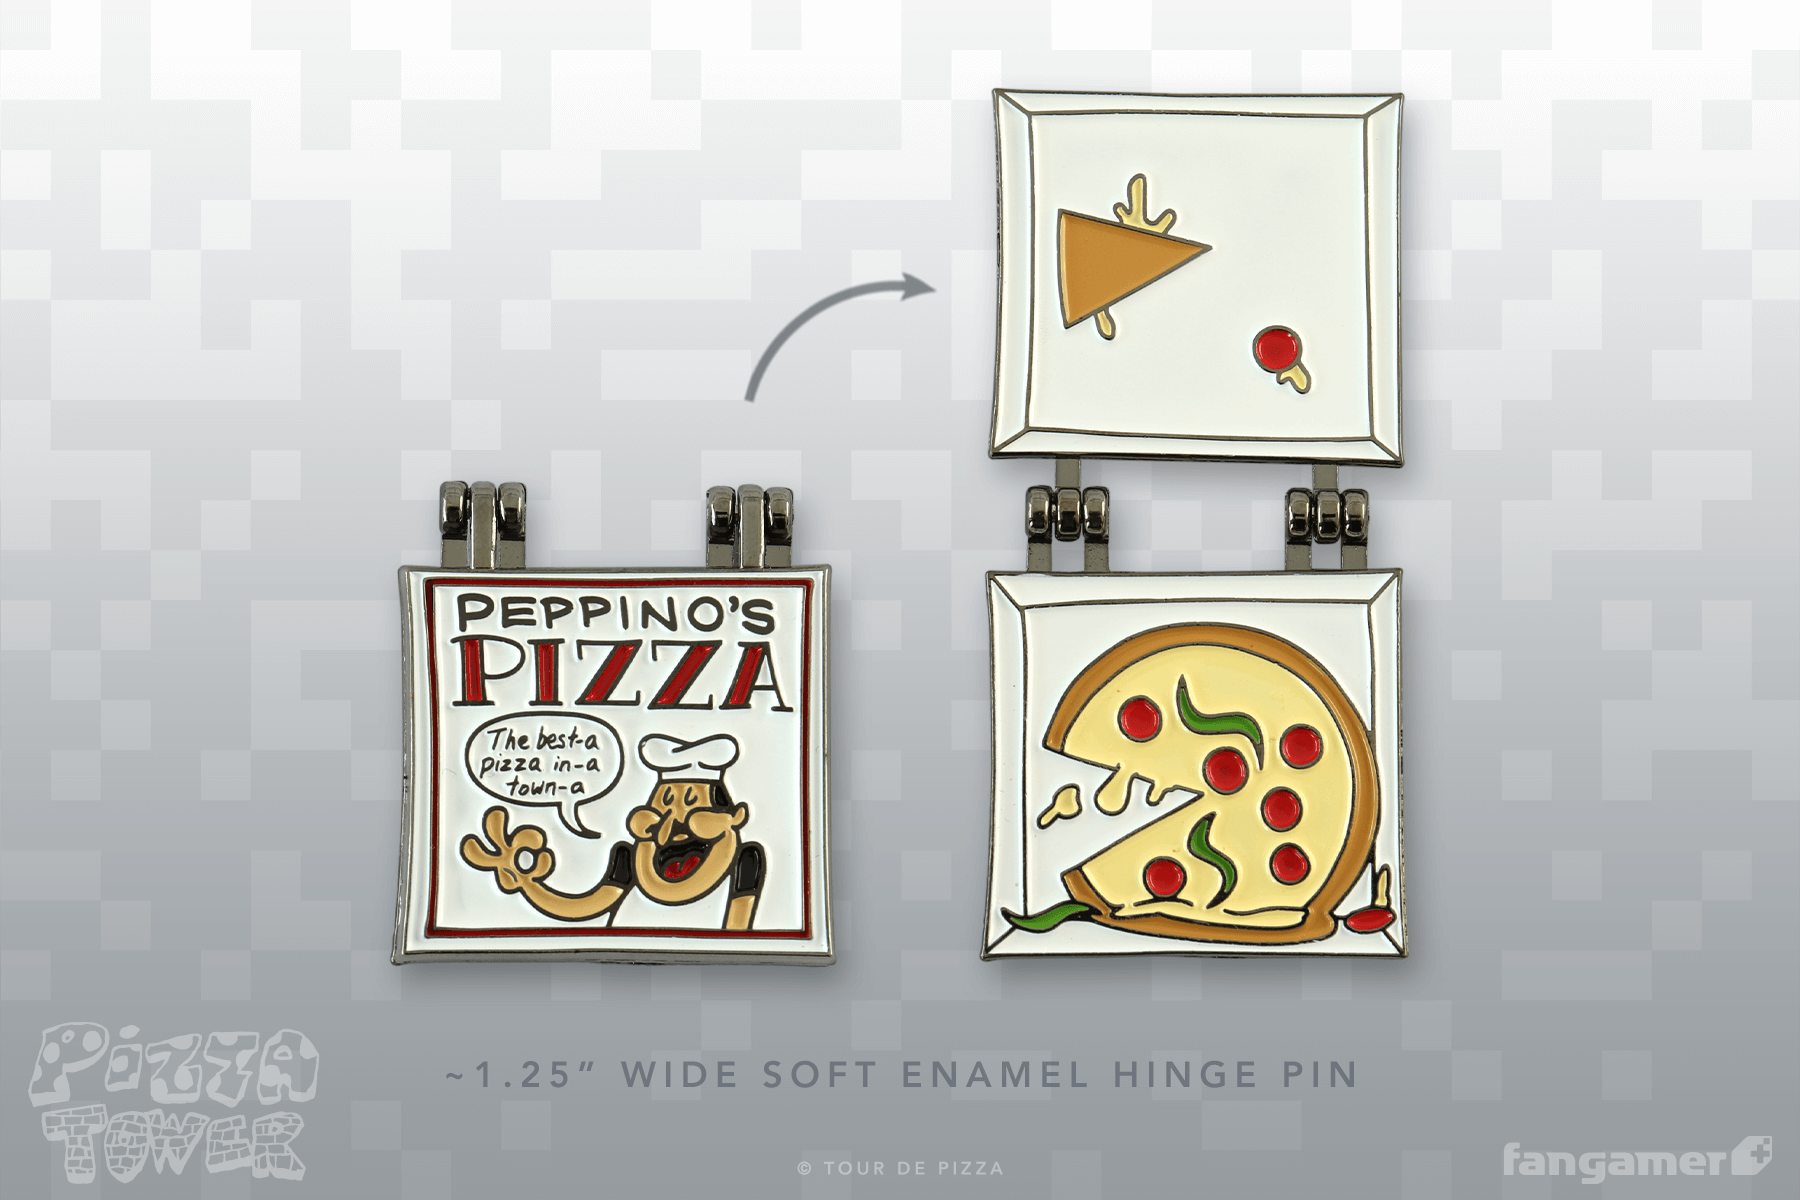 Pizza Tower - BEST-A Pizza Hinged Pin